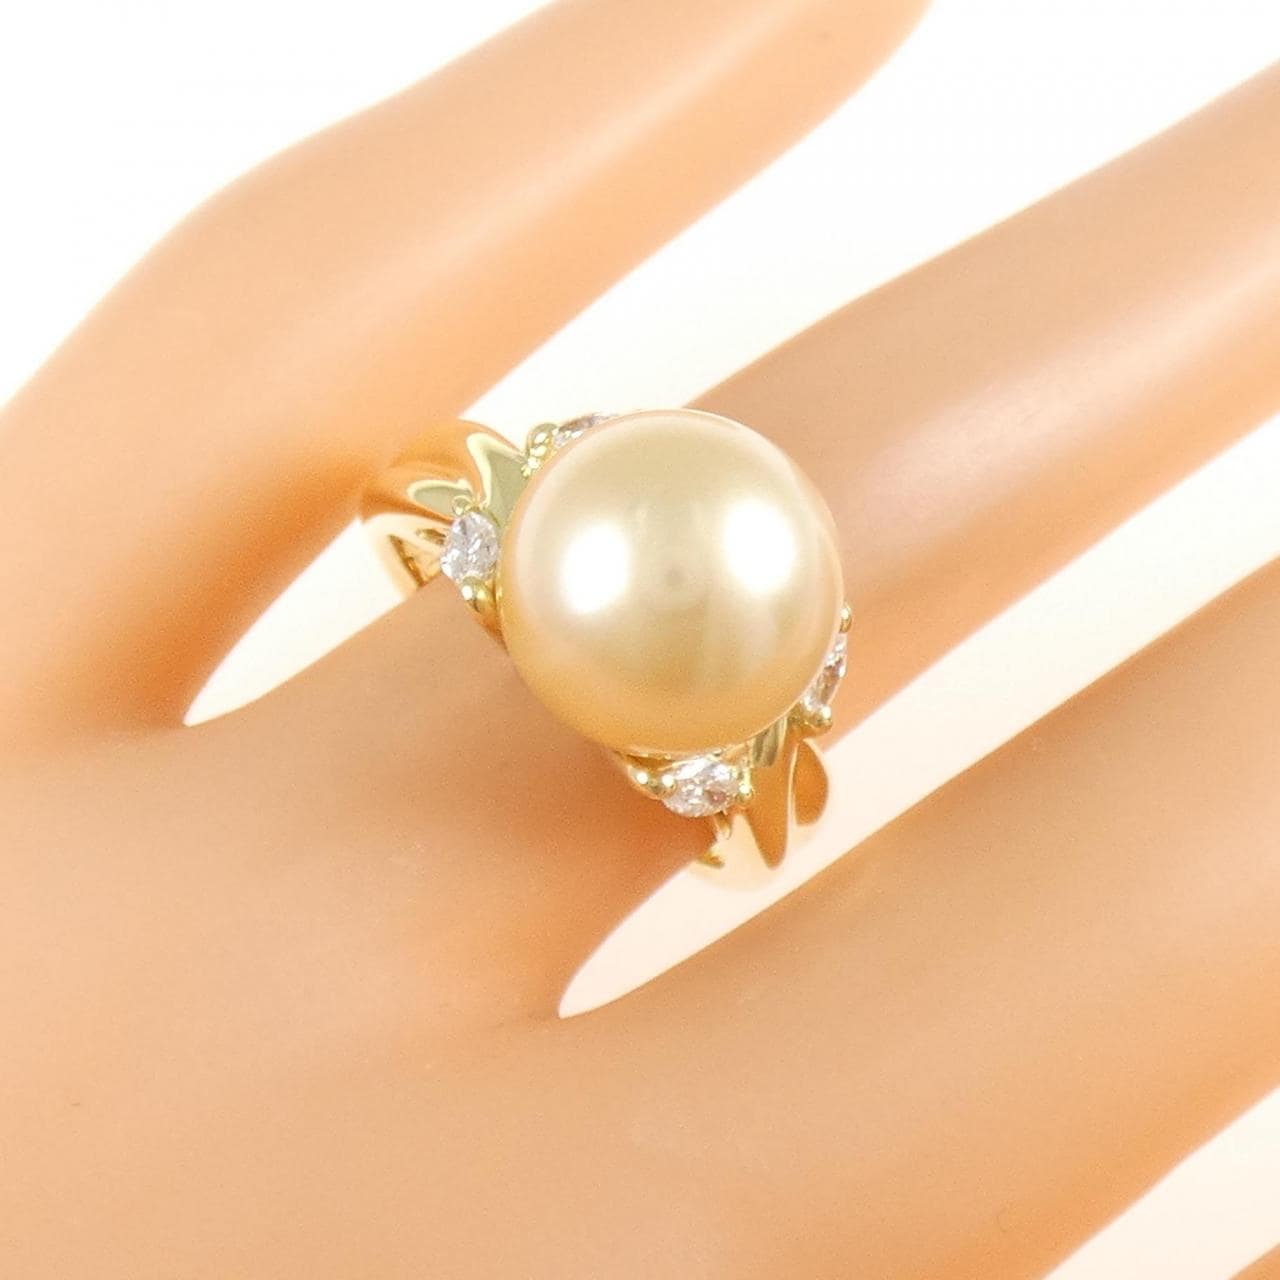 K18YG White Butterfly Pearl ring 11.5mm